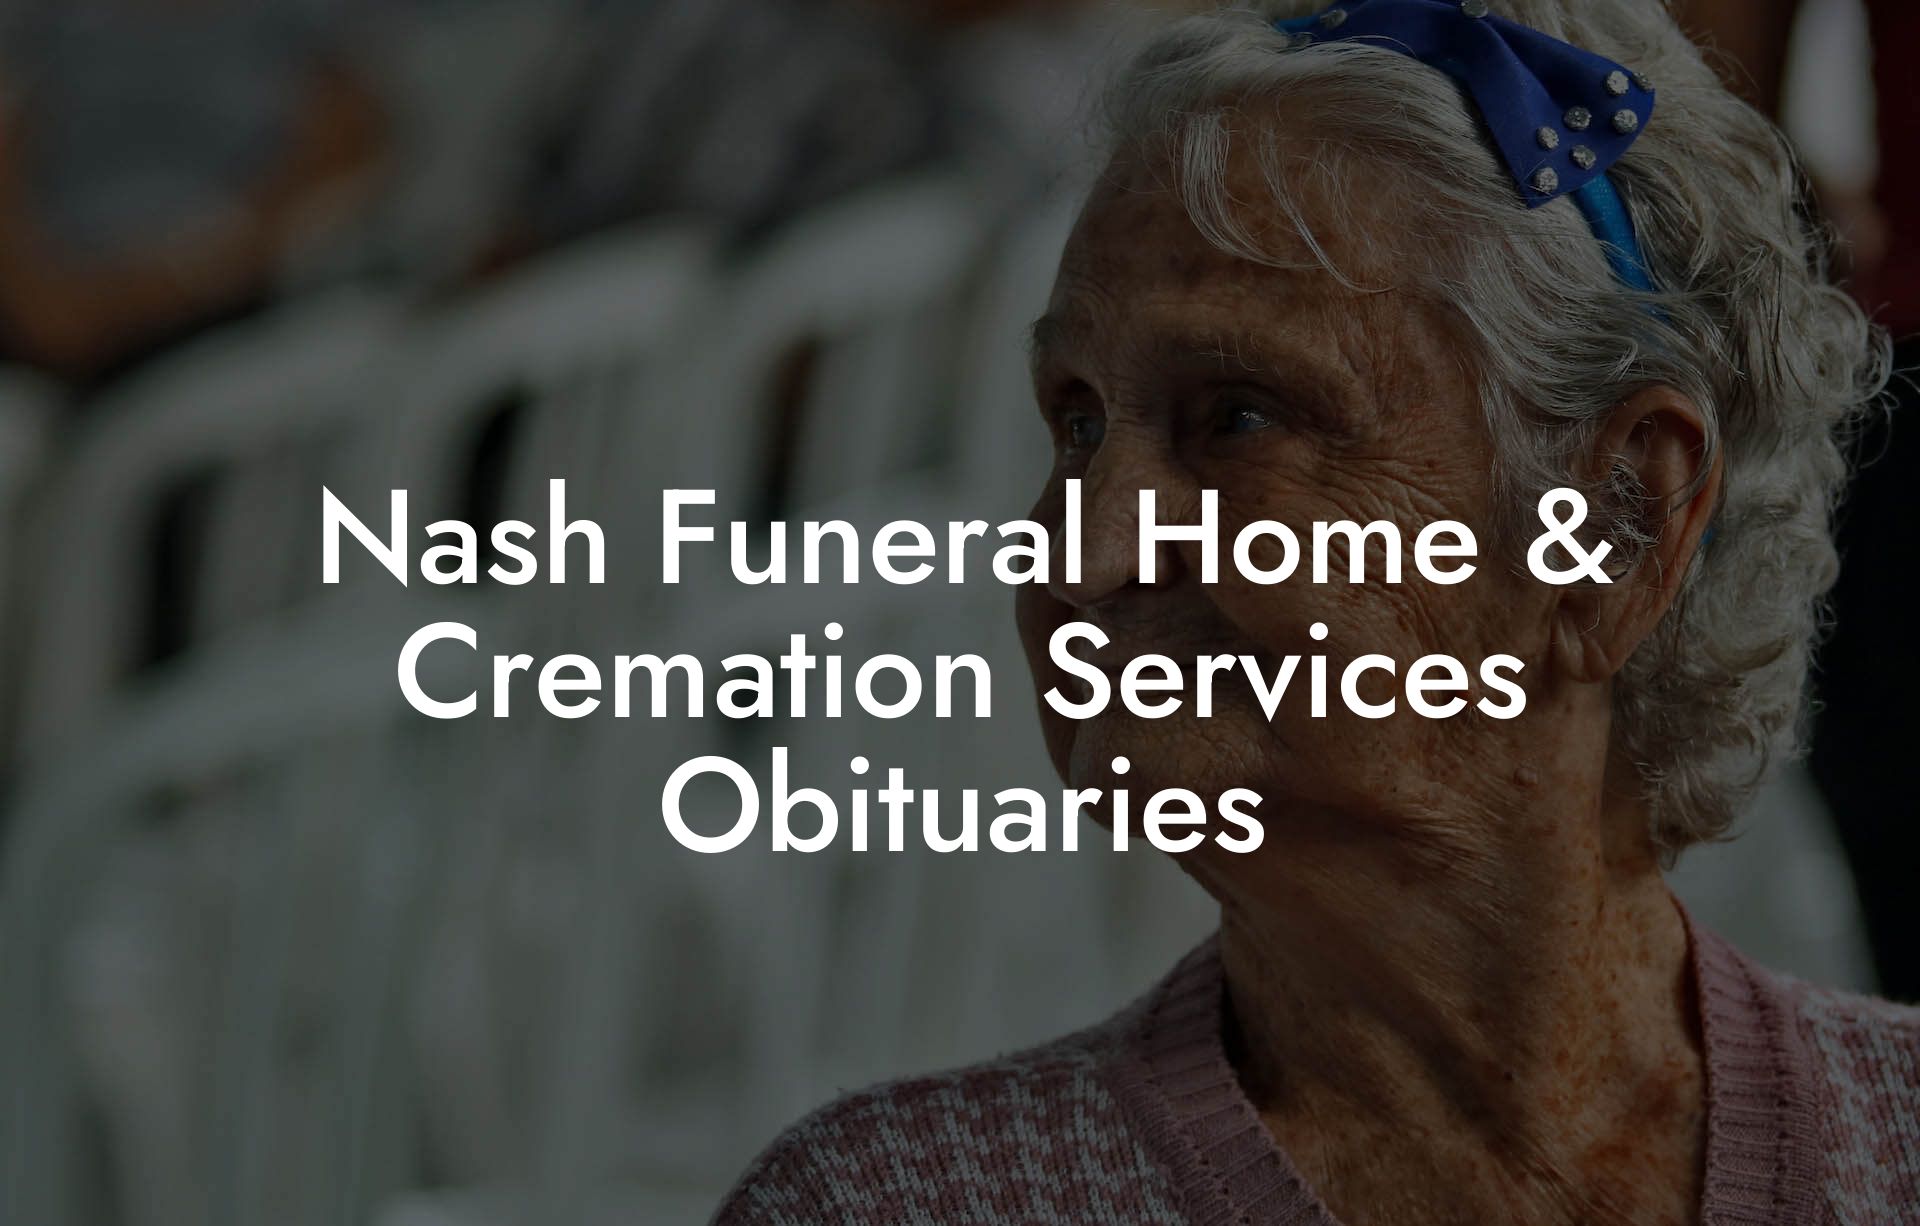 Nash Funeral Home & Cremation Services Obituaries